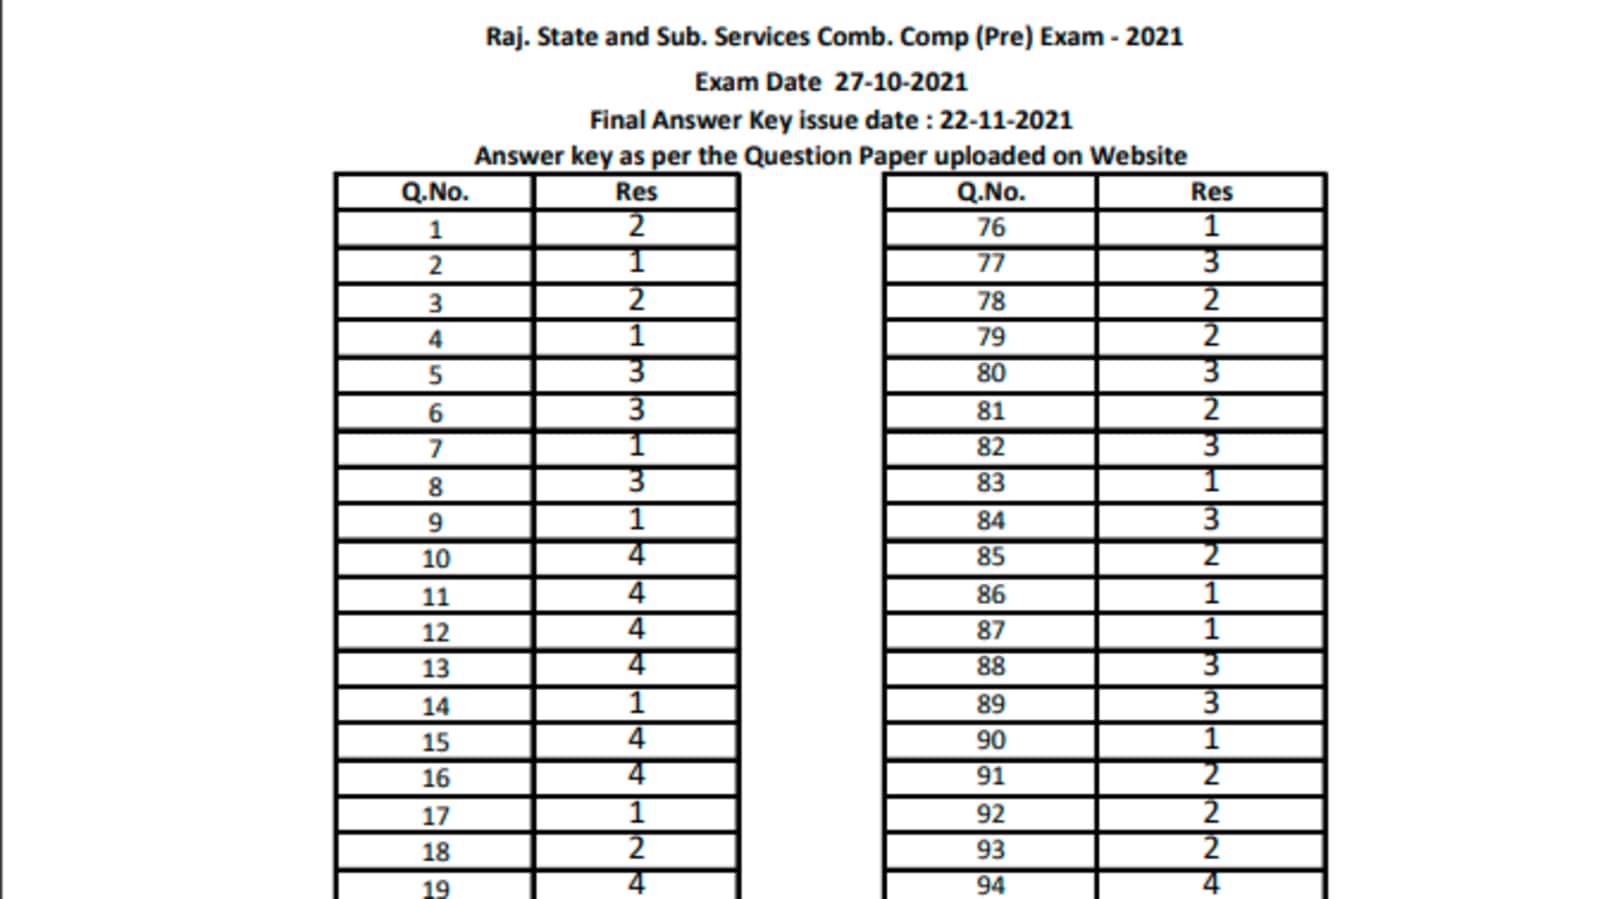 RPSC RAS final answer key and marks 2021 released at rpsc.rajasthan.gov.in